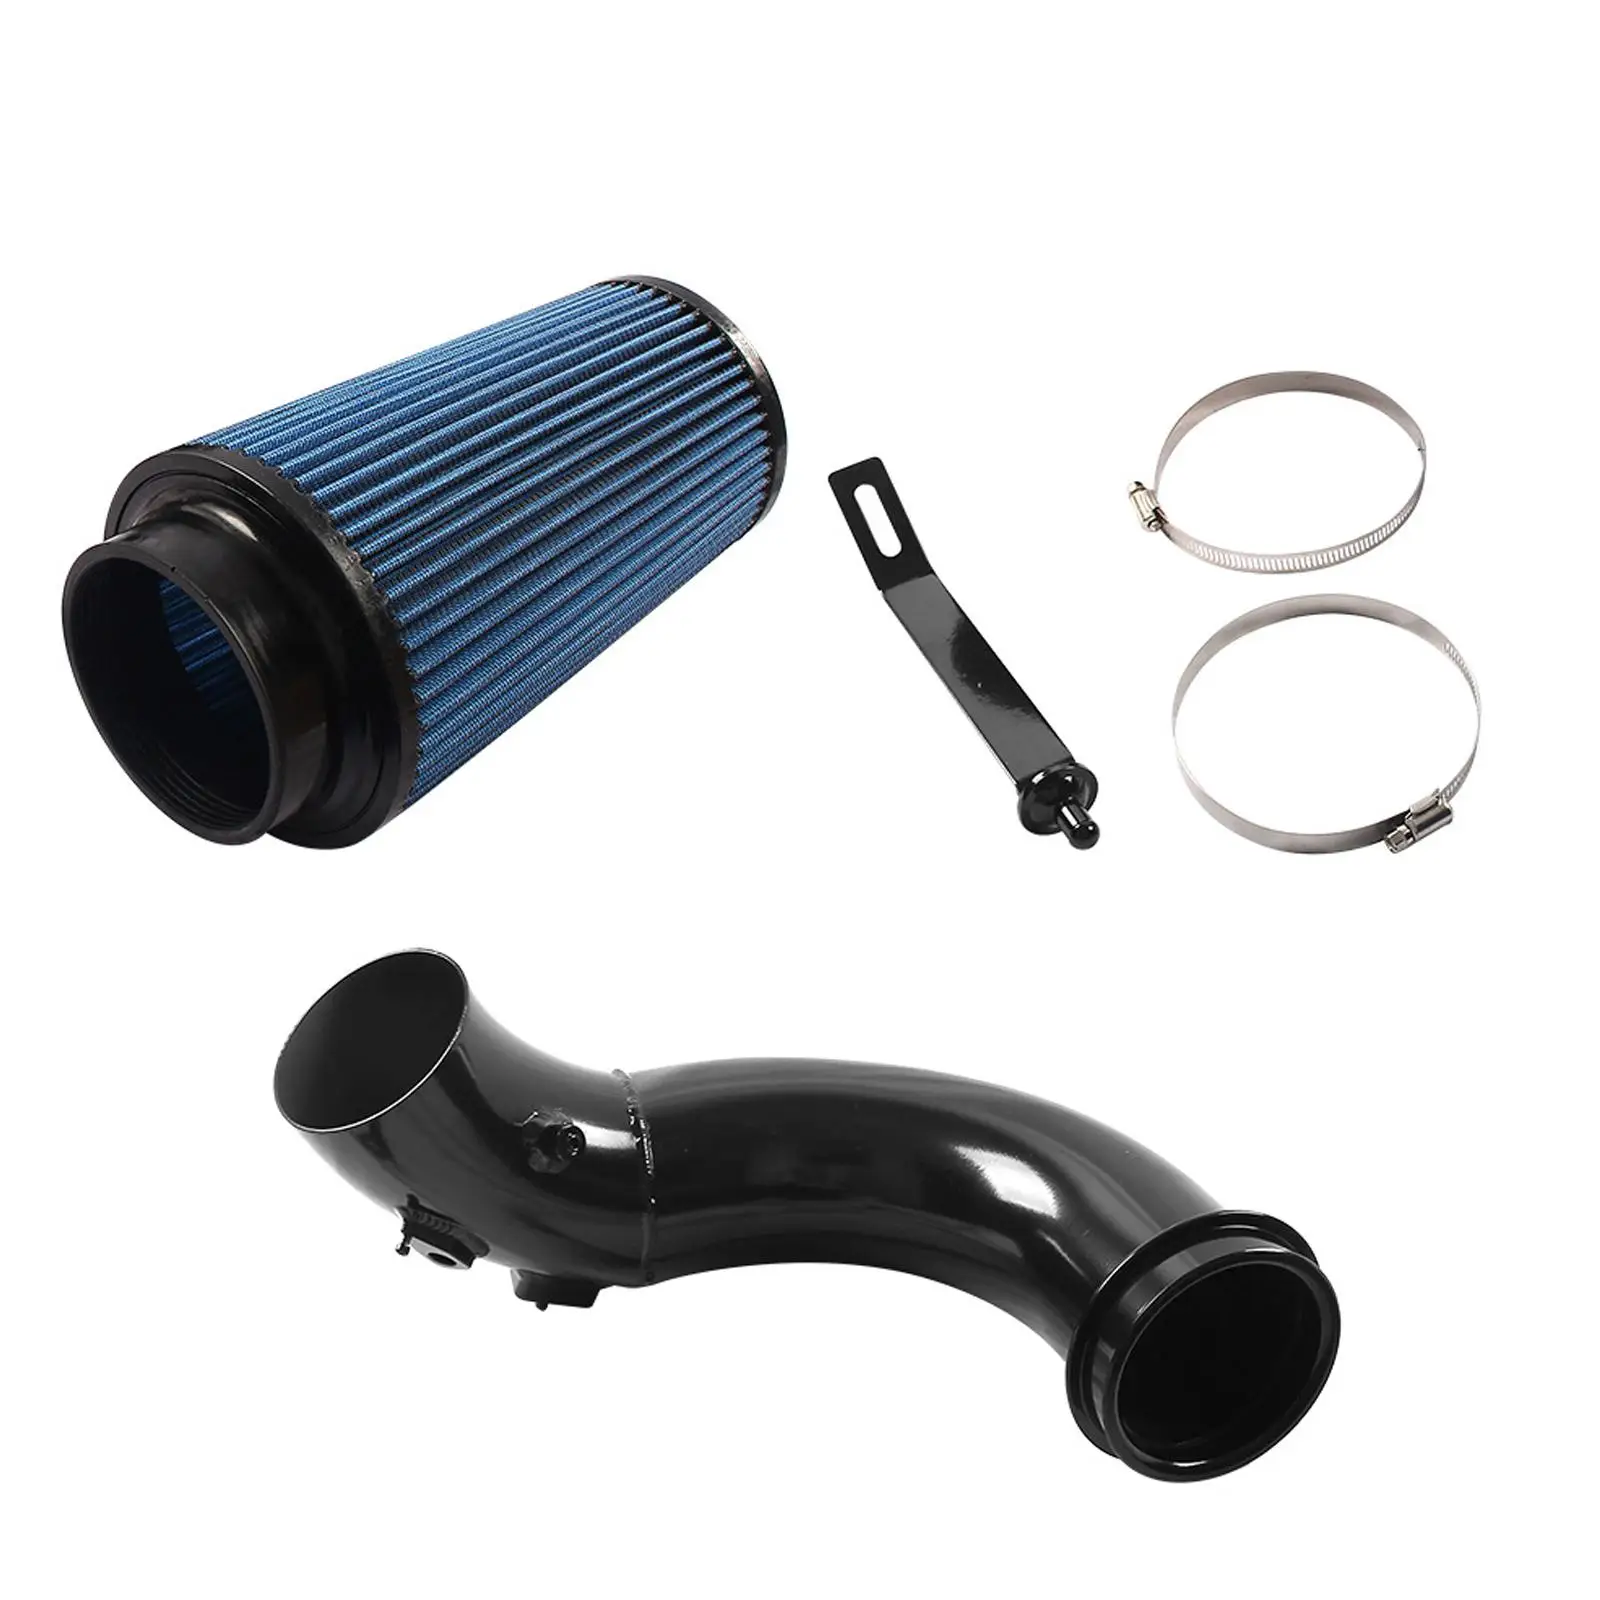 Cold Air Intake Filter/ with Filter/ Aluminum Alloy Iron Stainless Steel /for Replaces Black Accessories Car Parts